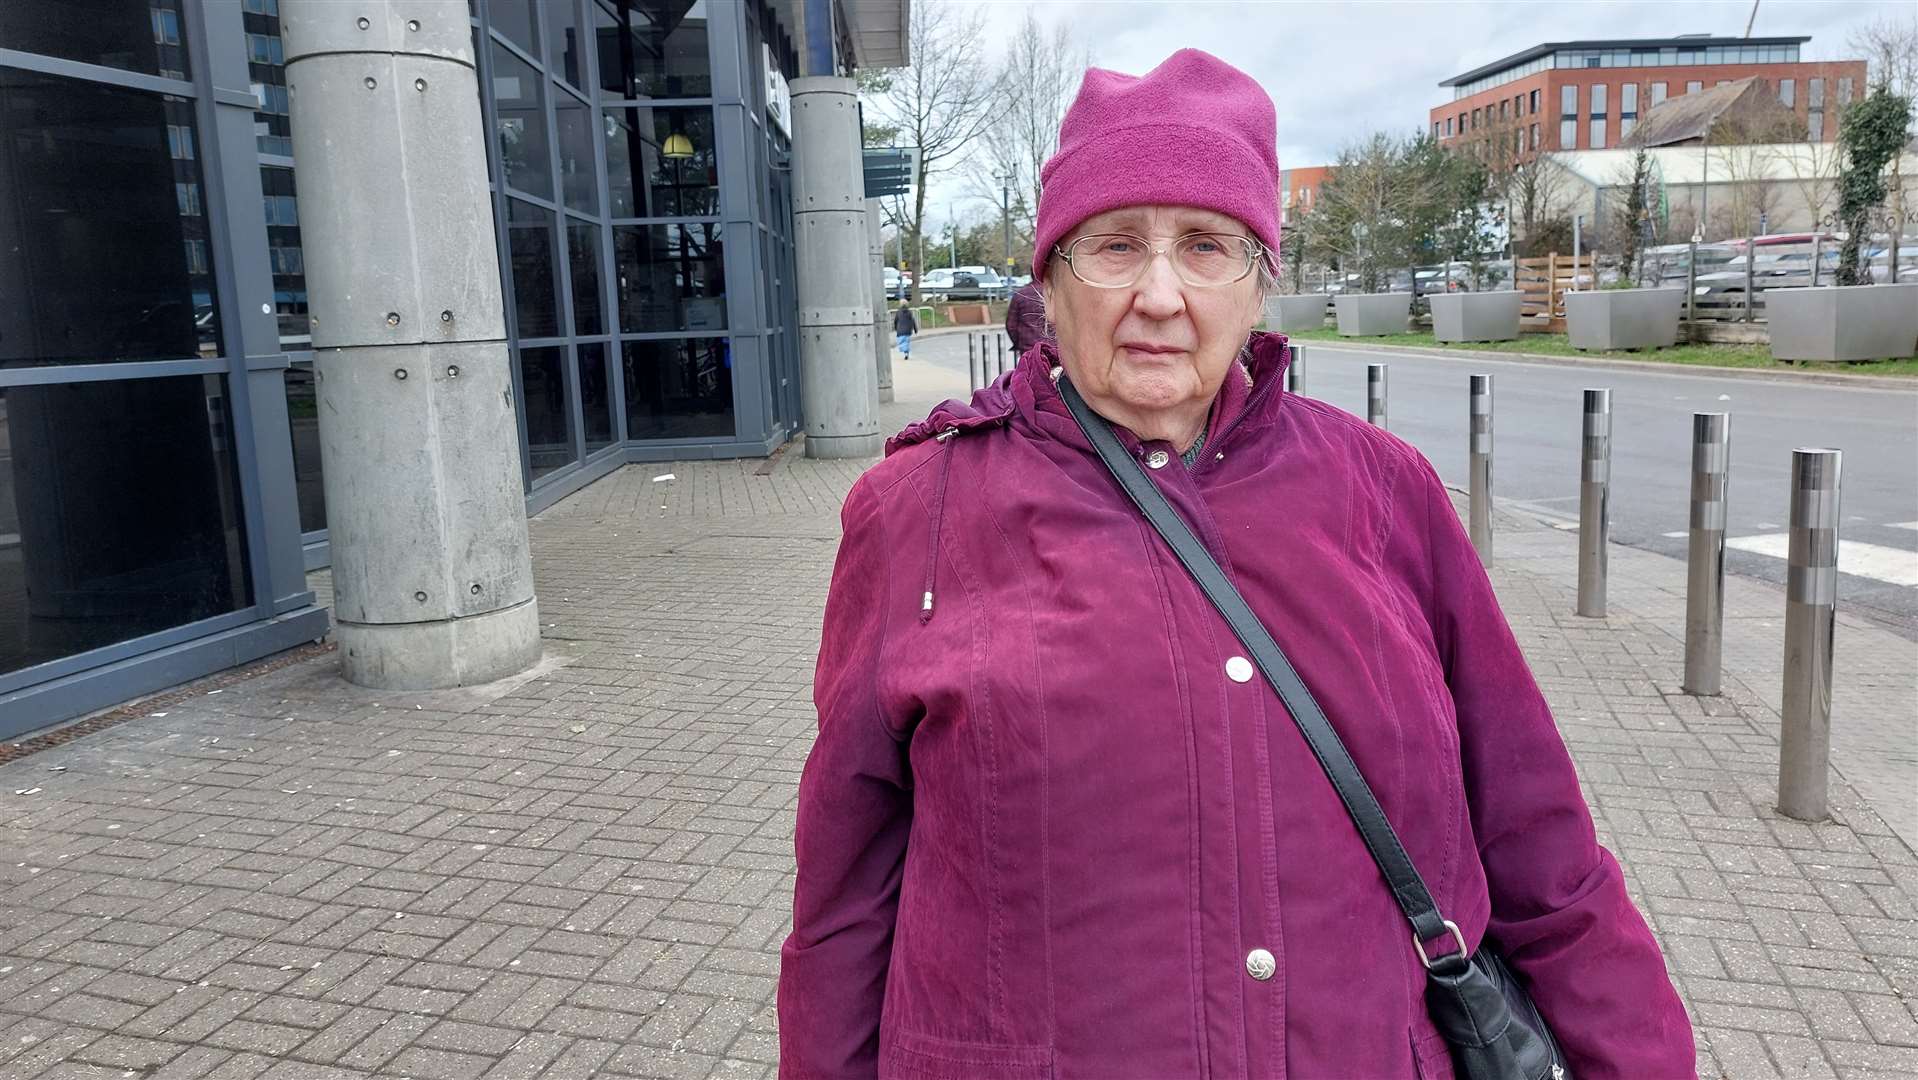 Heather Jarman, 72, from Godinton Park feels the Eurostar should be brought back to Ashford